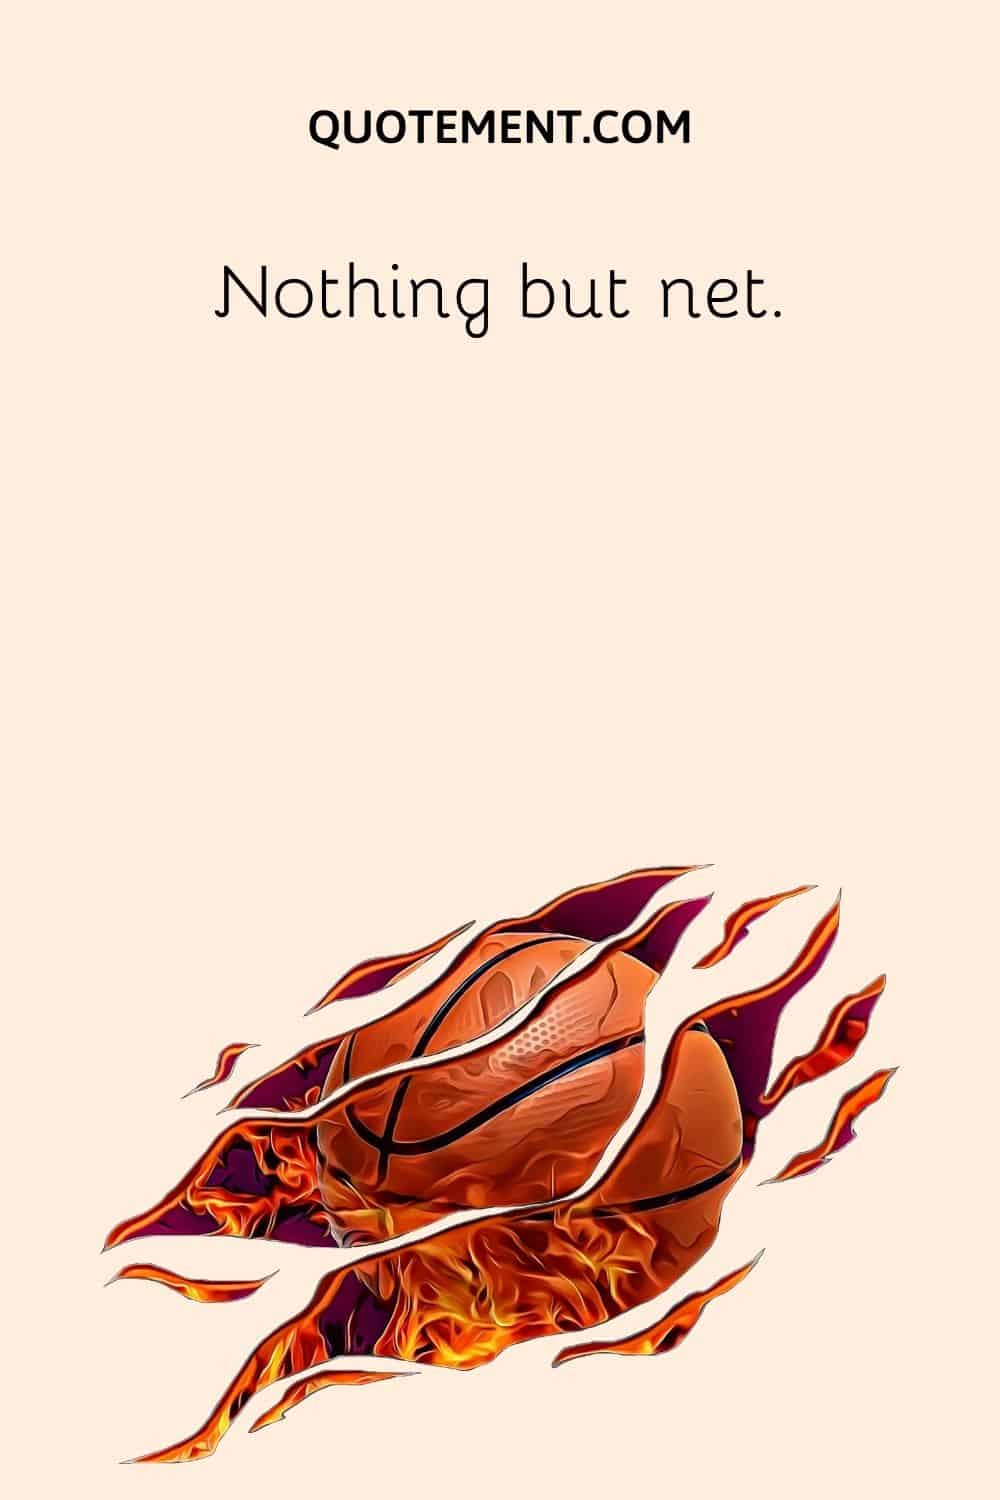 Nothing but net